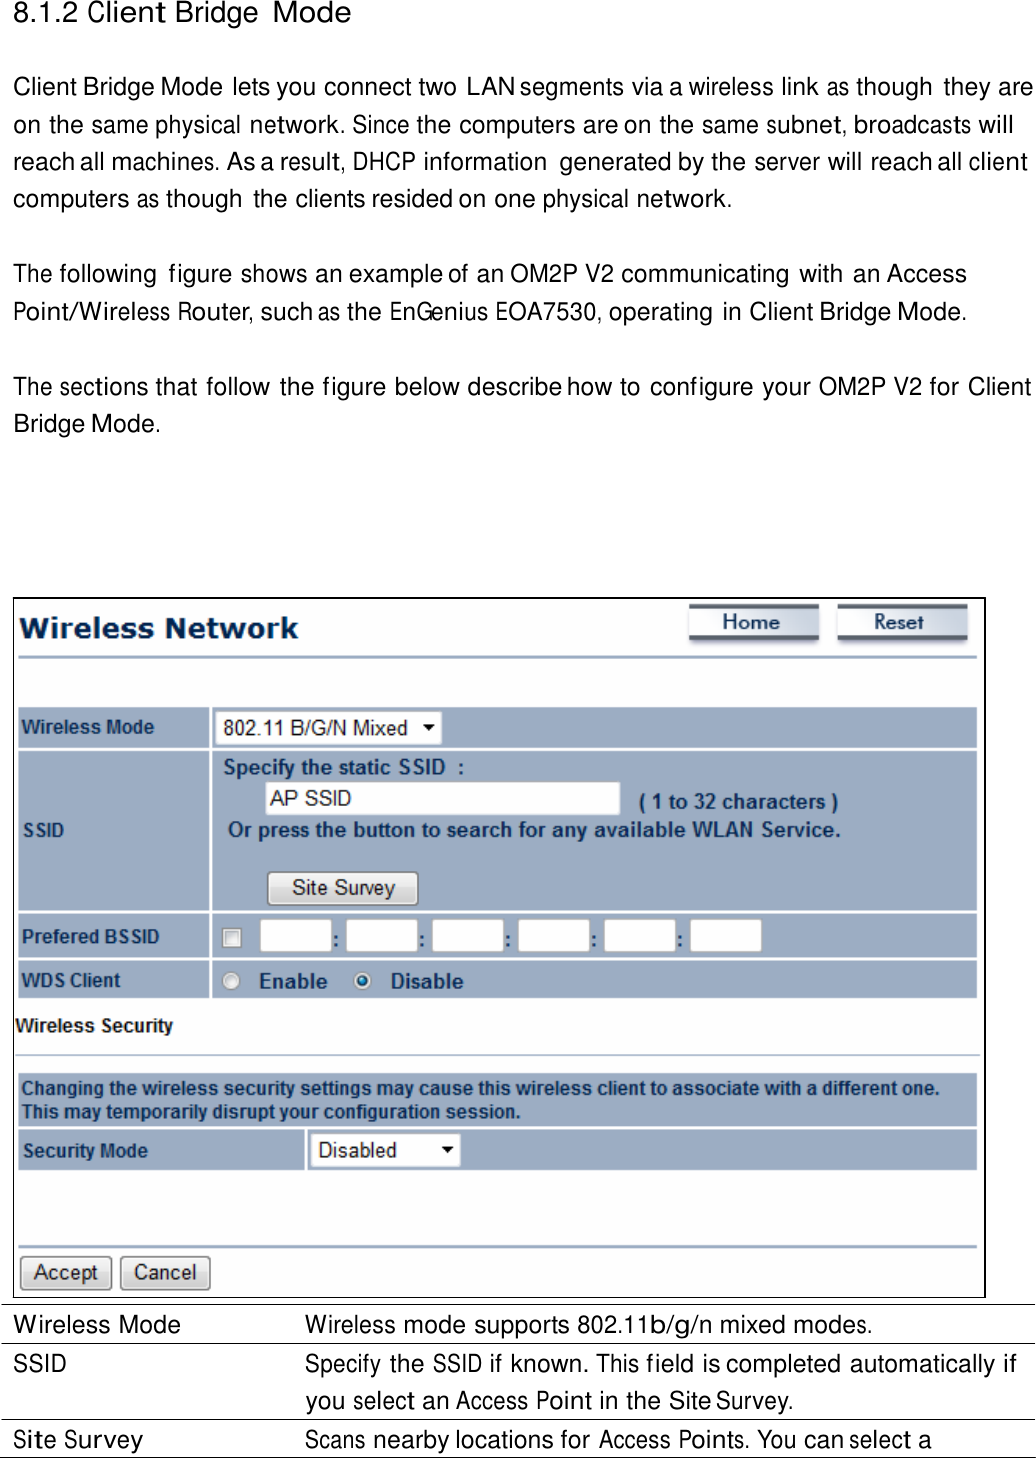  8.1.2 Client Bridge Mode   Client Bridge Mode lets you connect two LAN segments via a wireless link as though they are on the same physical network. Since the computers are on the same subnet, broadcasts will reach all machines. As a result, DHCP information  generated by the server will reach all client computers as though the clients resided on one physical network.   The following  figure shows an example of an OM2P V2 communicating with an Access Point/Wireless Router, such as the EnGenius EOA7530, operating in Client Bridge Mode.   The sections that follow the figure below describe how to configure your OM2P V2 for Client Bridge Mode.                                           Wireless Mode  Wireless mode supports 802.11b/g/n mixed modes. SSID Specify the SSID if known. This field is completed automatically if you select an Access Point in the Site Survey. Site Survey Scans nearby locations for Access Points. You can select a 